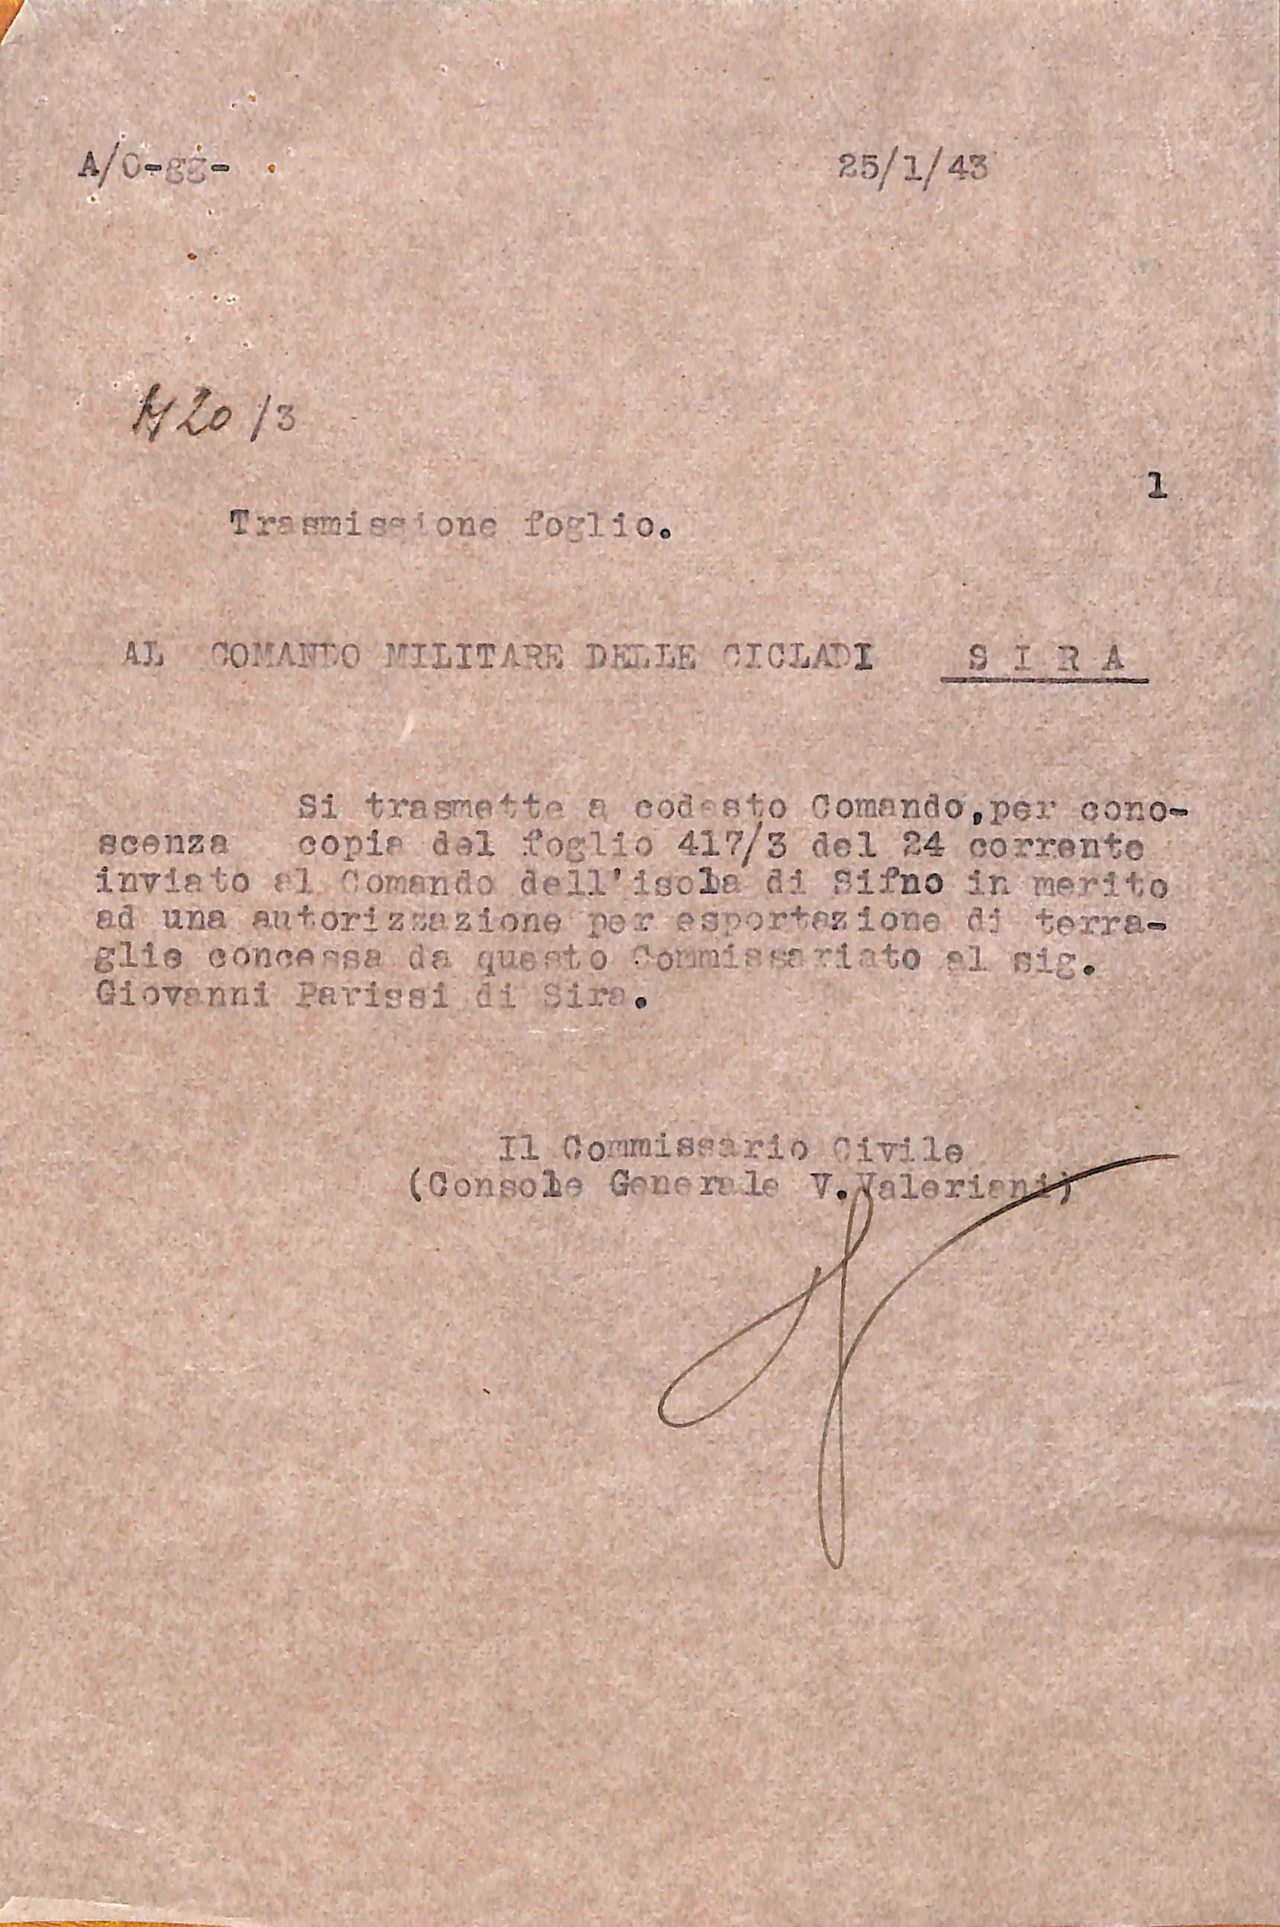 Authorization notice for pottery purchase, January 25, 1943.